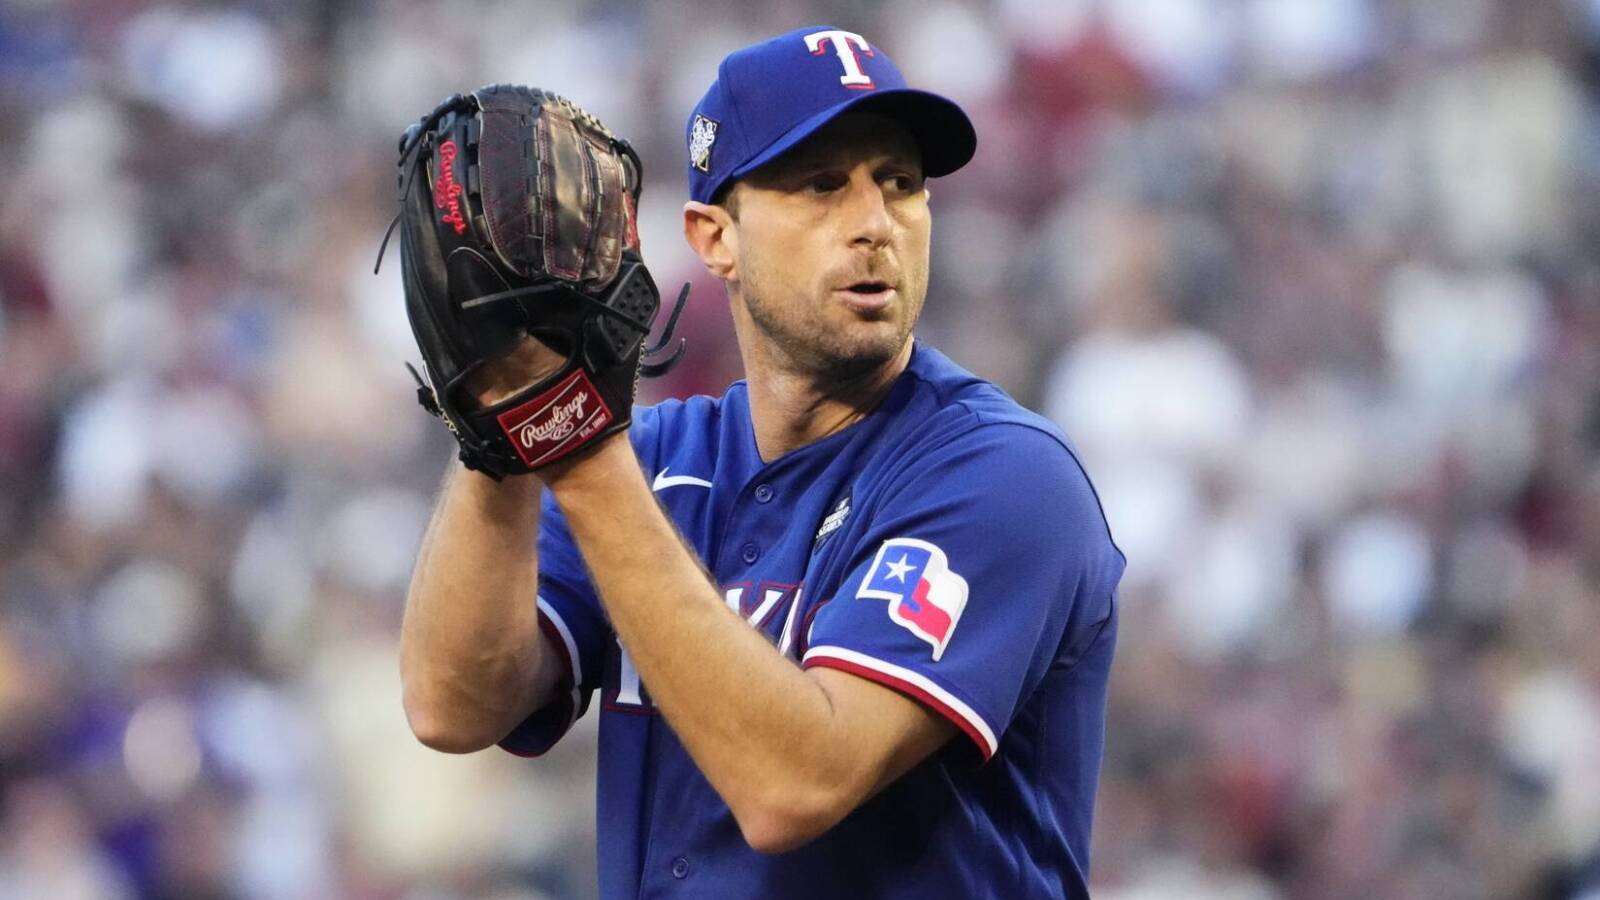 Rangers ace continues to be plagued by nerve irritation in thumb